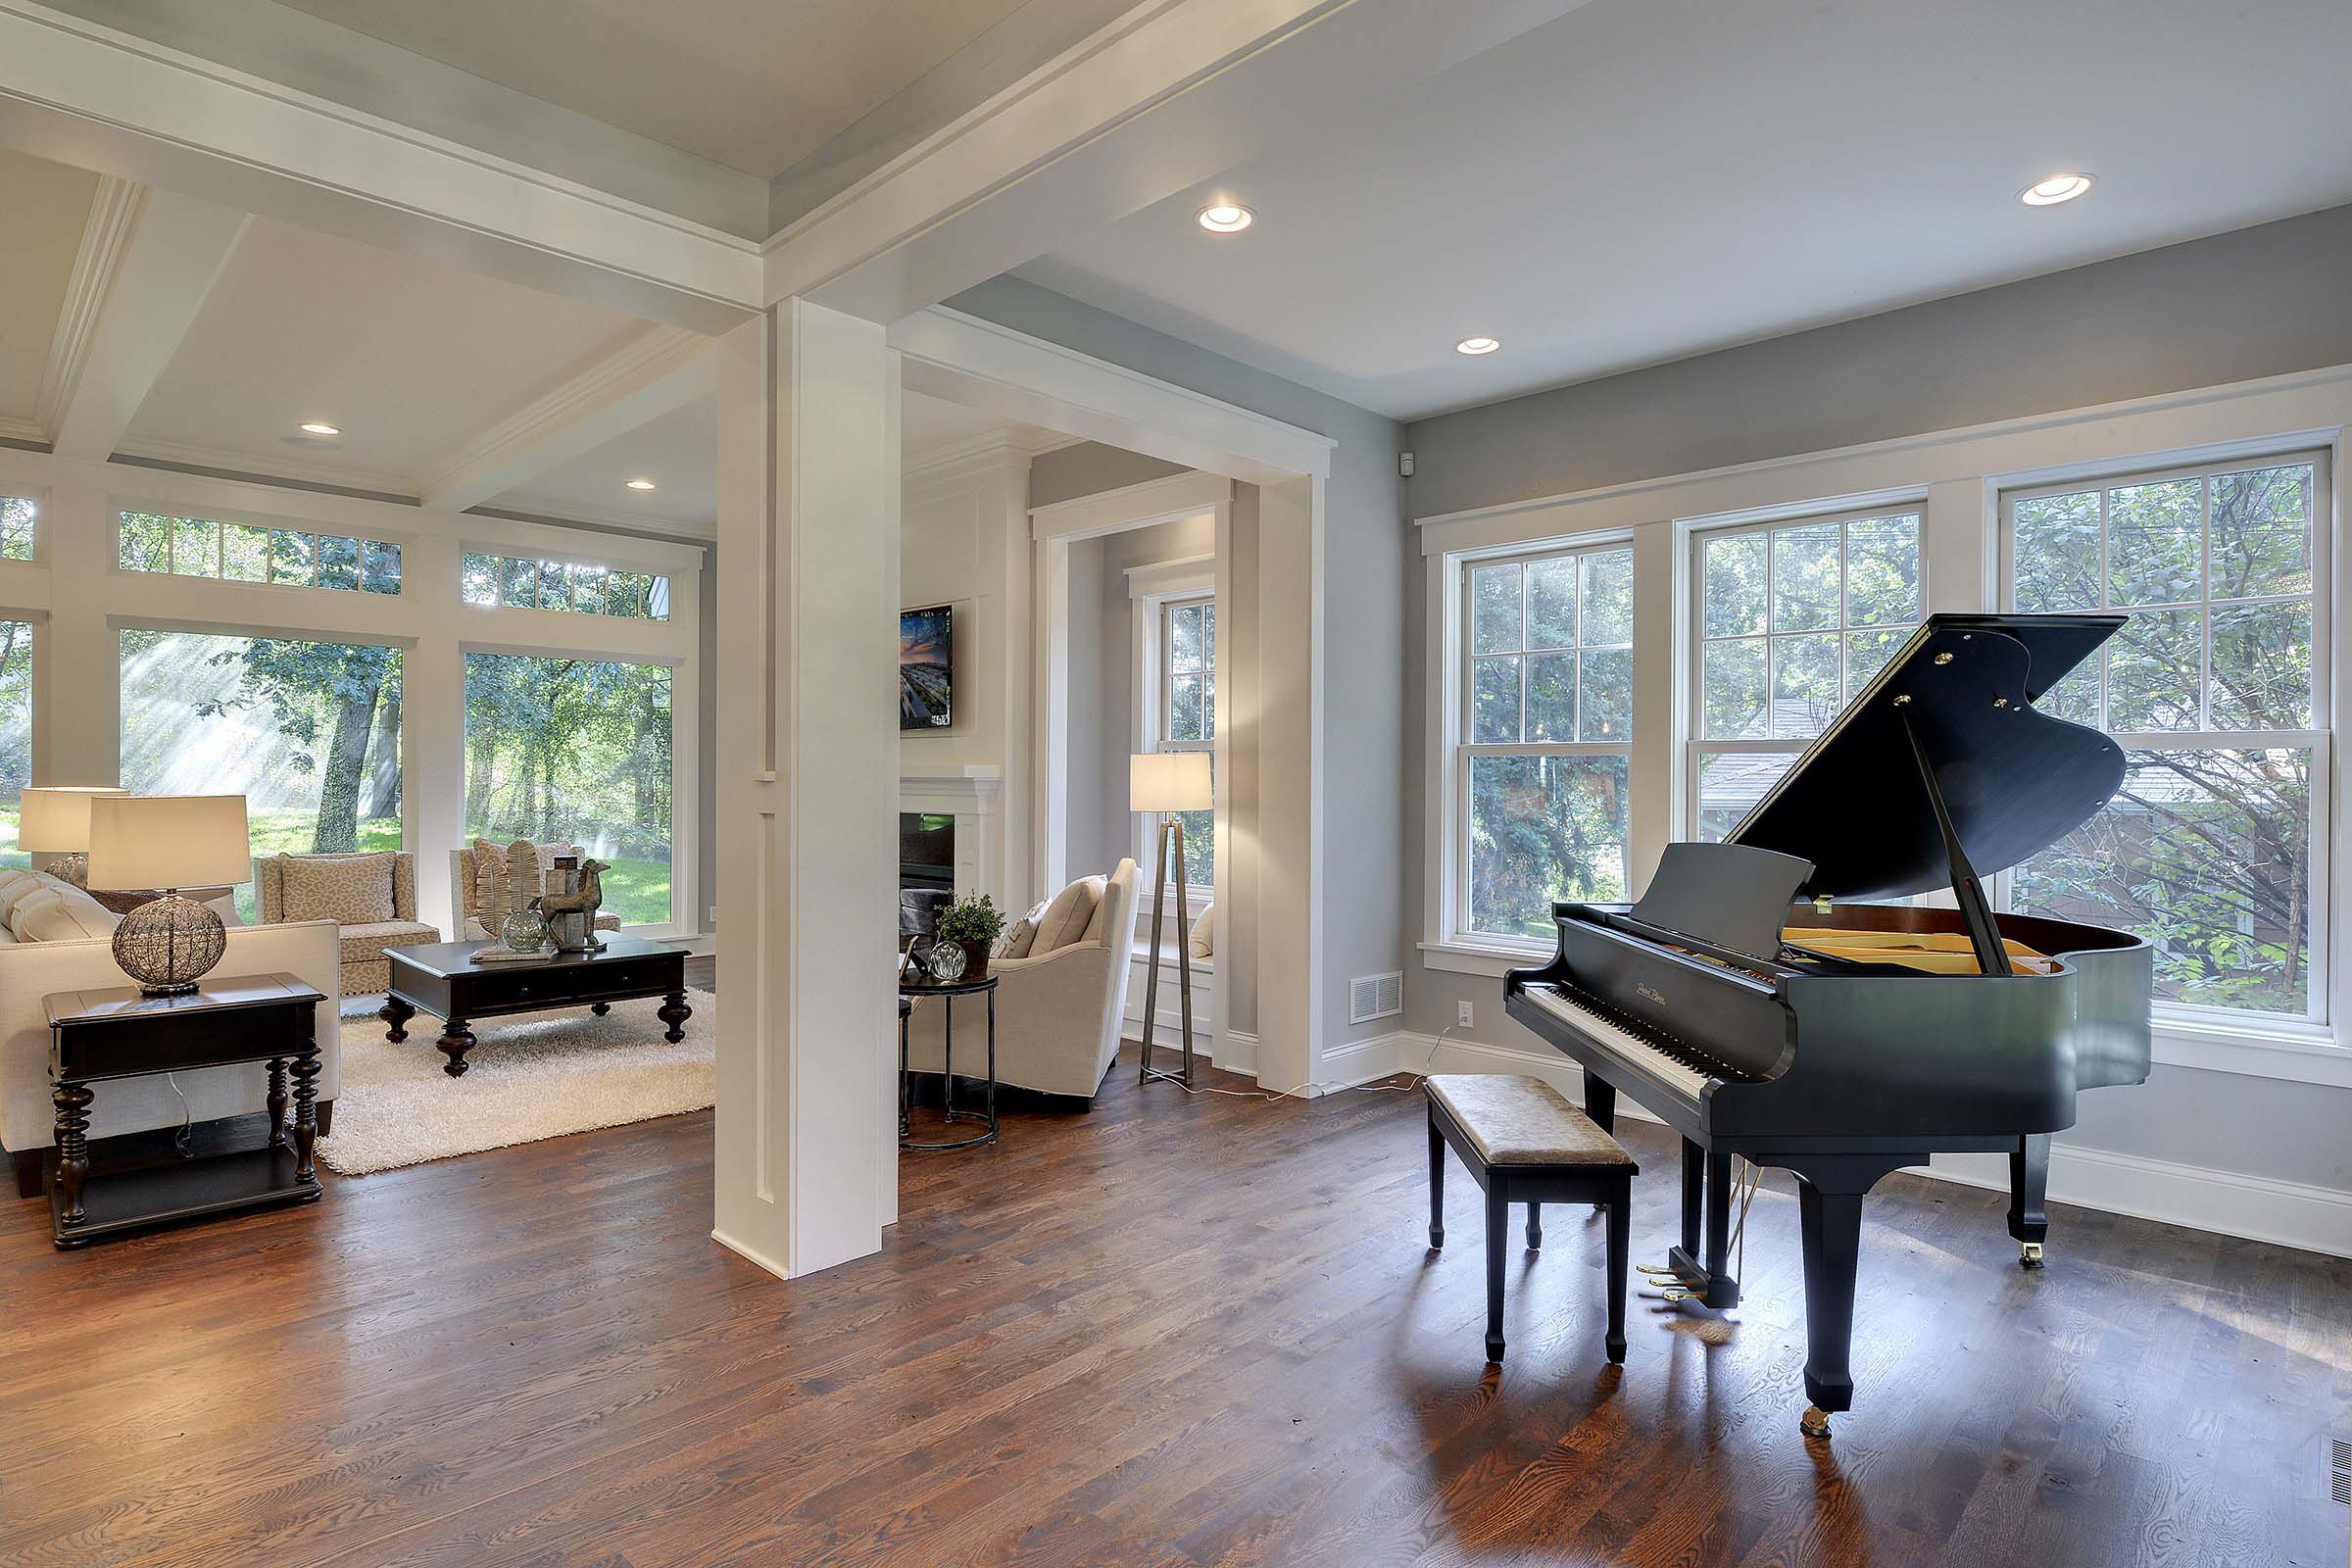 A living room with a piano and hardwood floors.